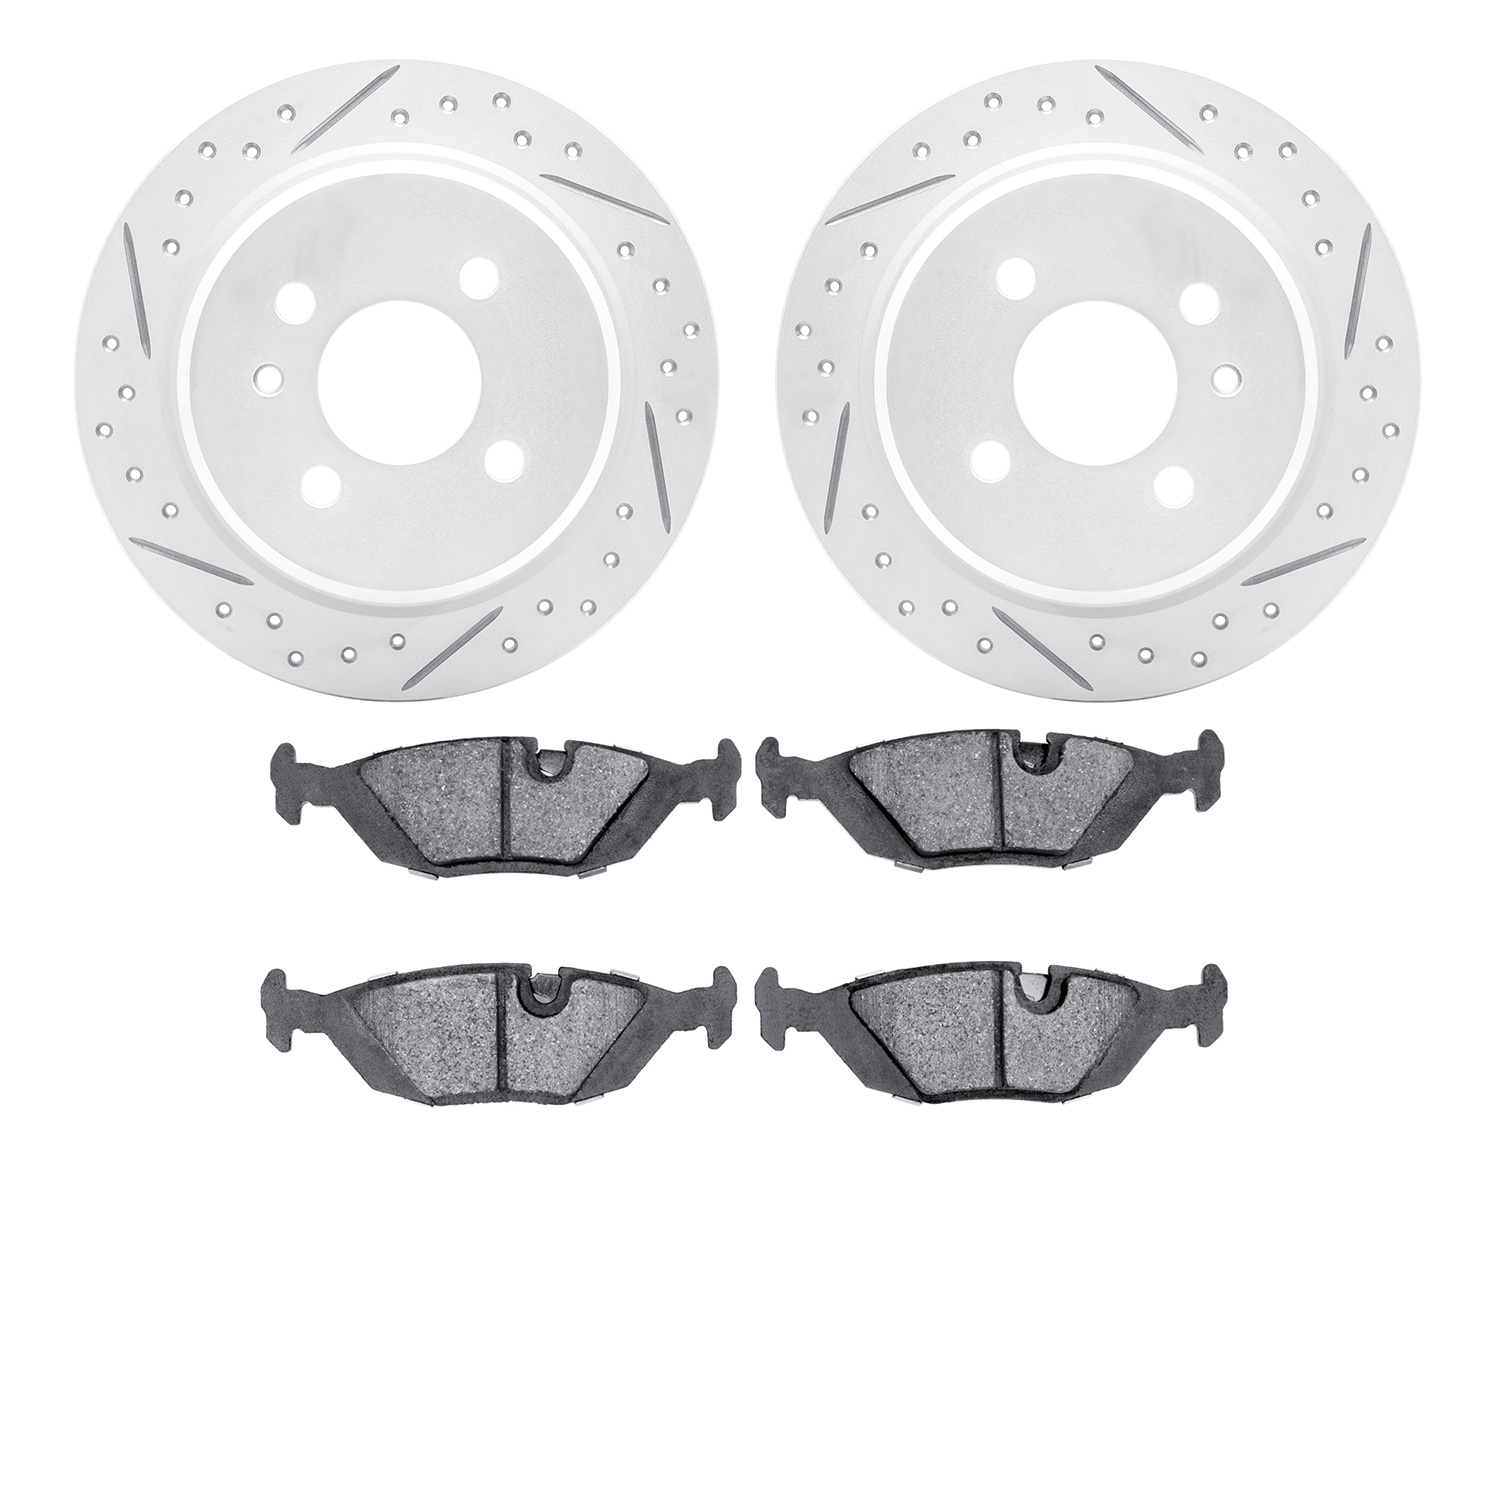 2502-31003 Geoperformance Drilled/Slotted Rotors w/5000 Advanced Brake Pads Kit, 1984-1991 BMW, Position: Rear